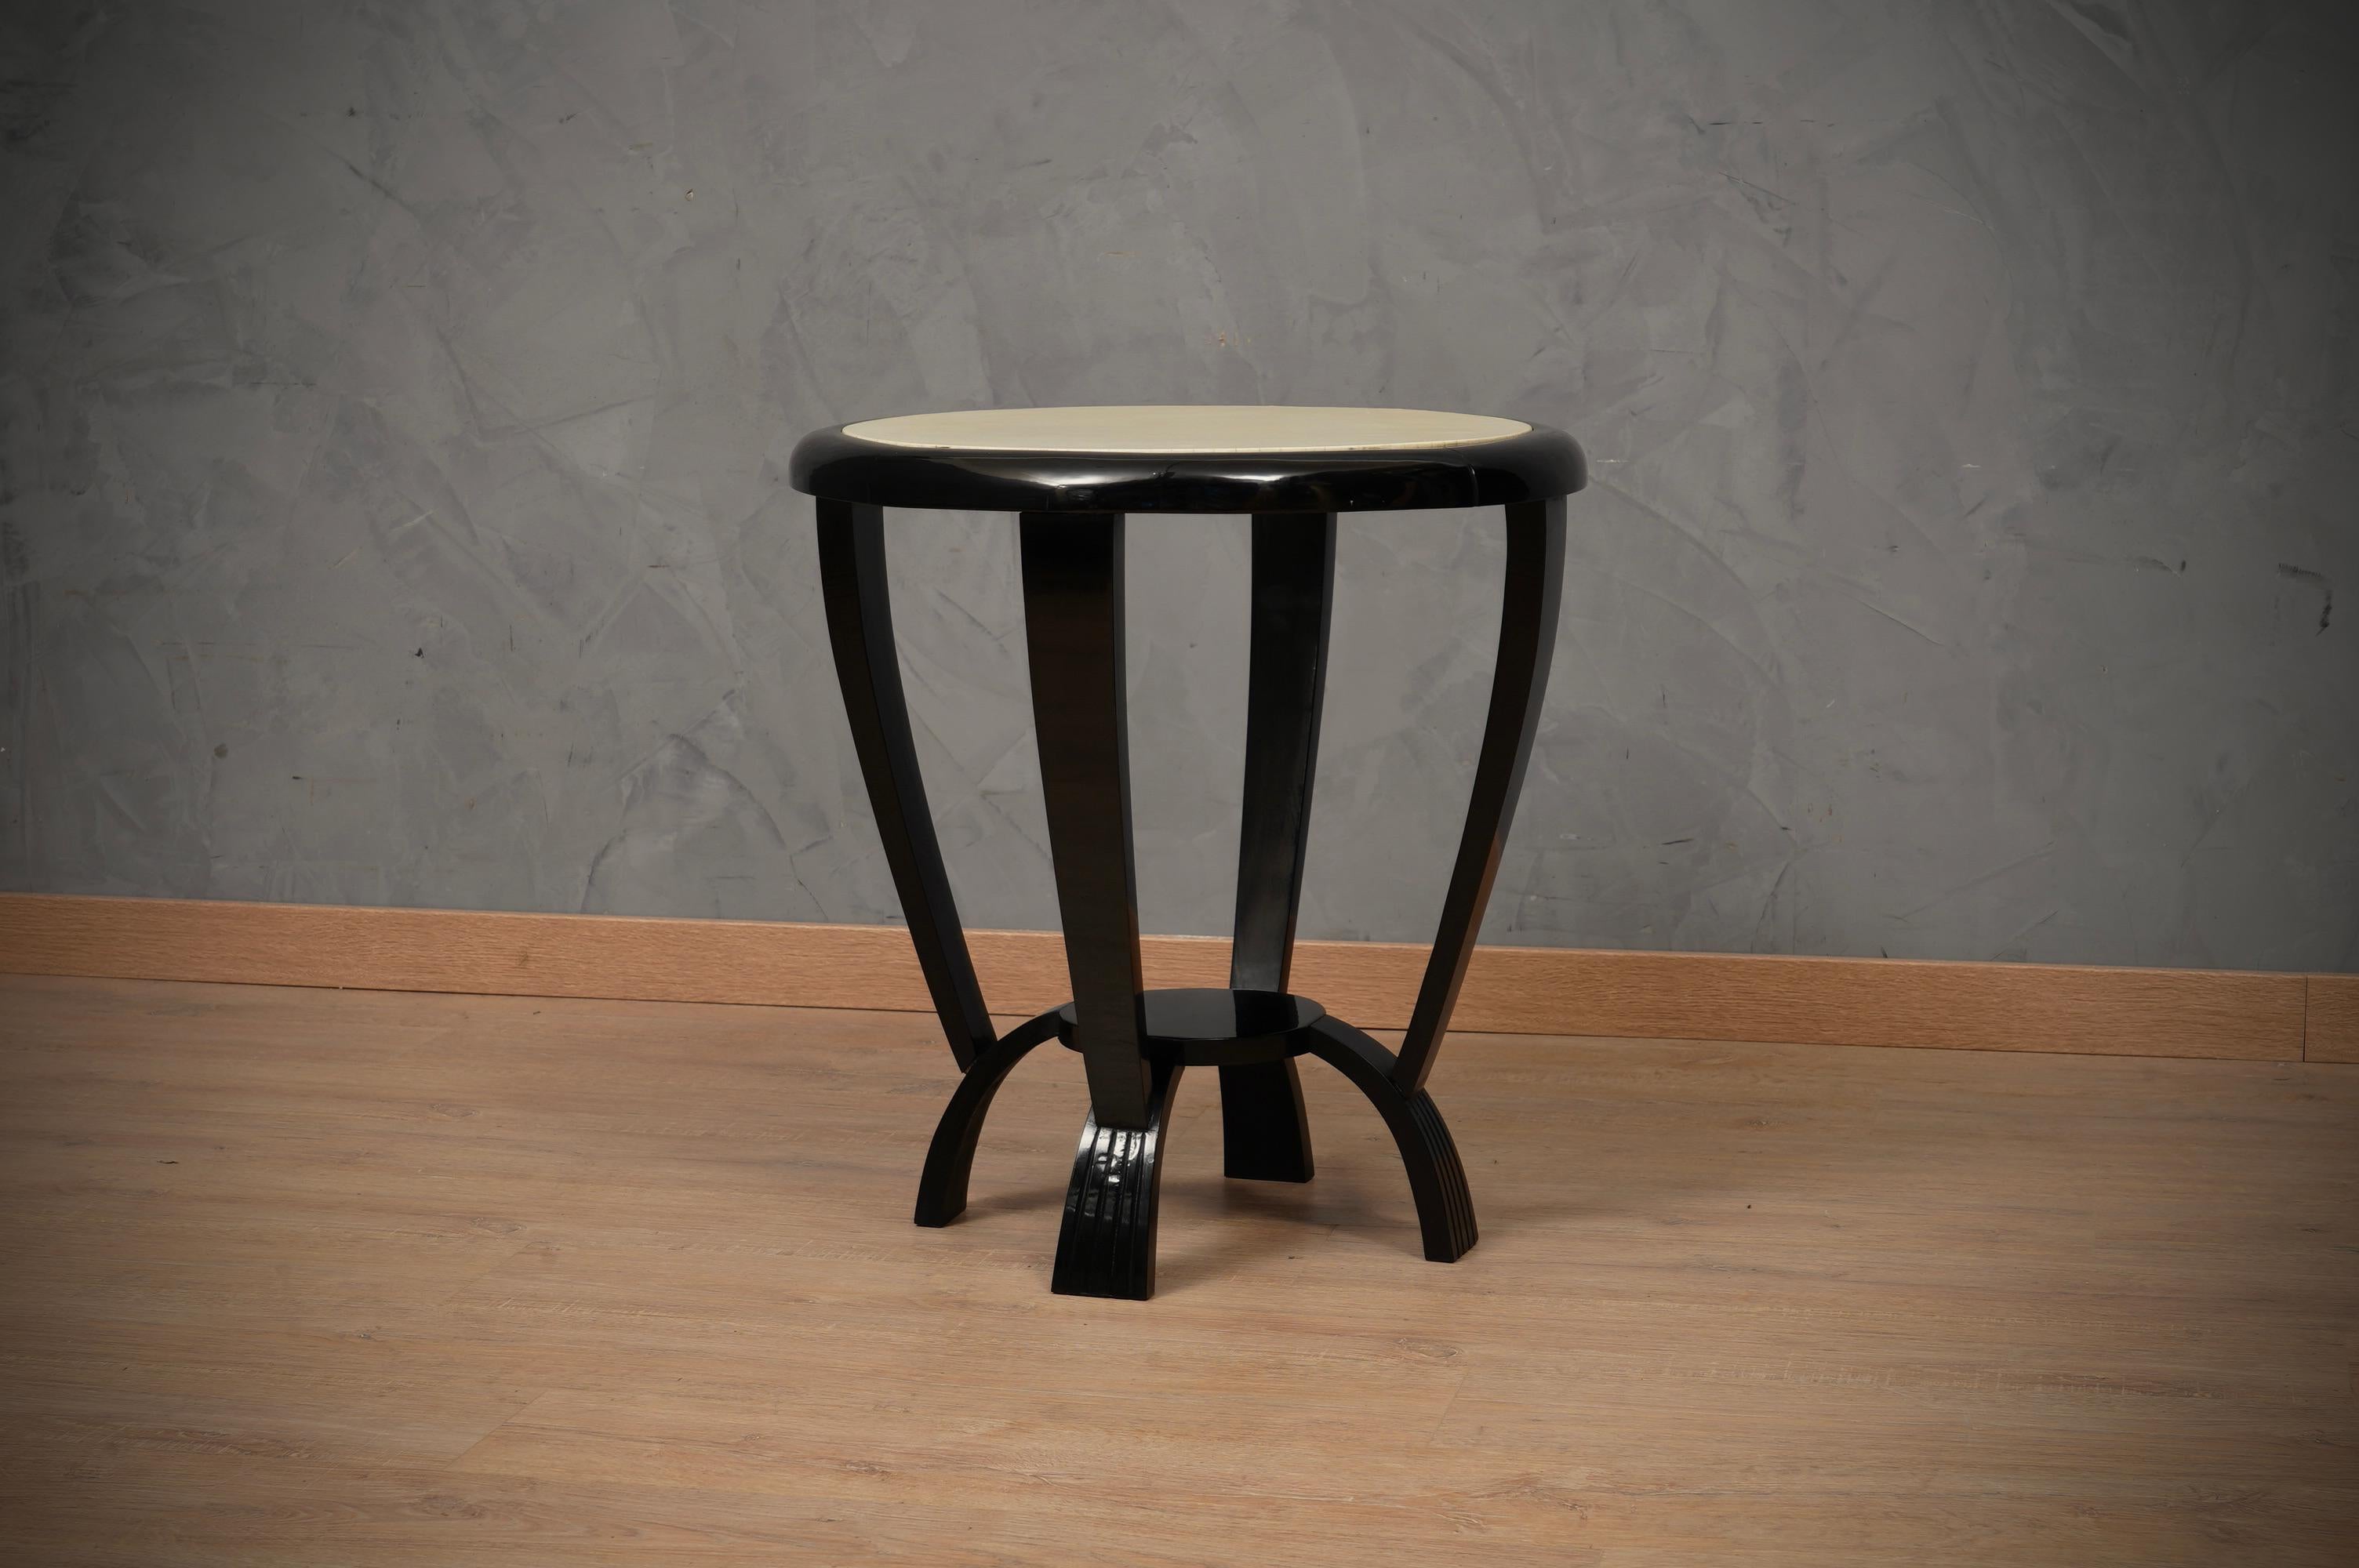 Rich design for this couple of side tables, polished with black shellac and covered with goatskin.

Top is covered in goatskin and then well-polished. A single piece of leather for the top table, even more difficult to find, very precious. The edge